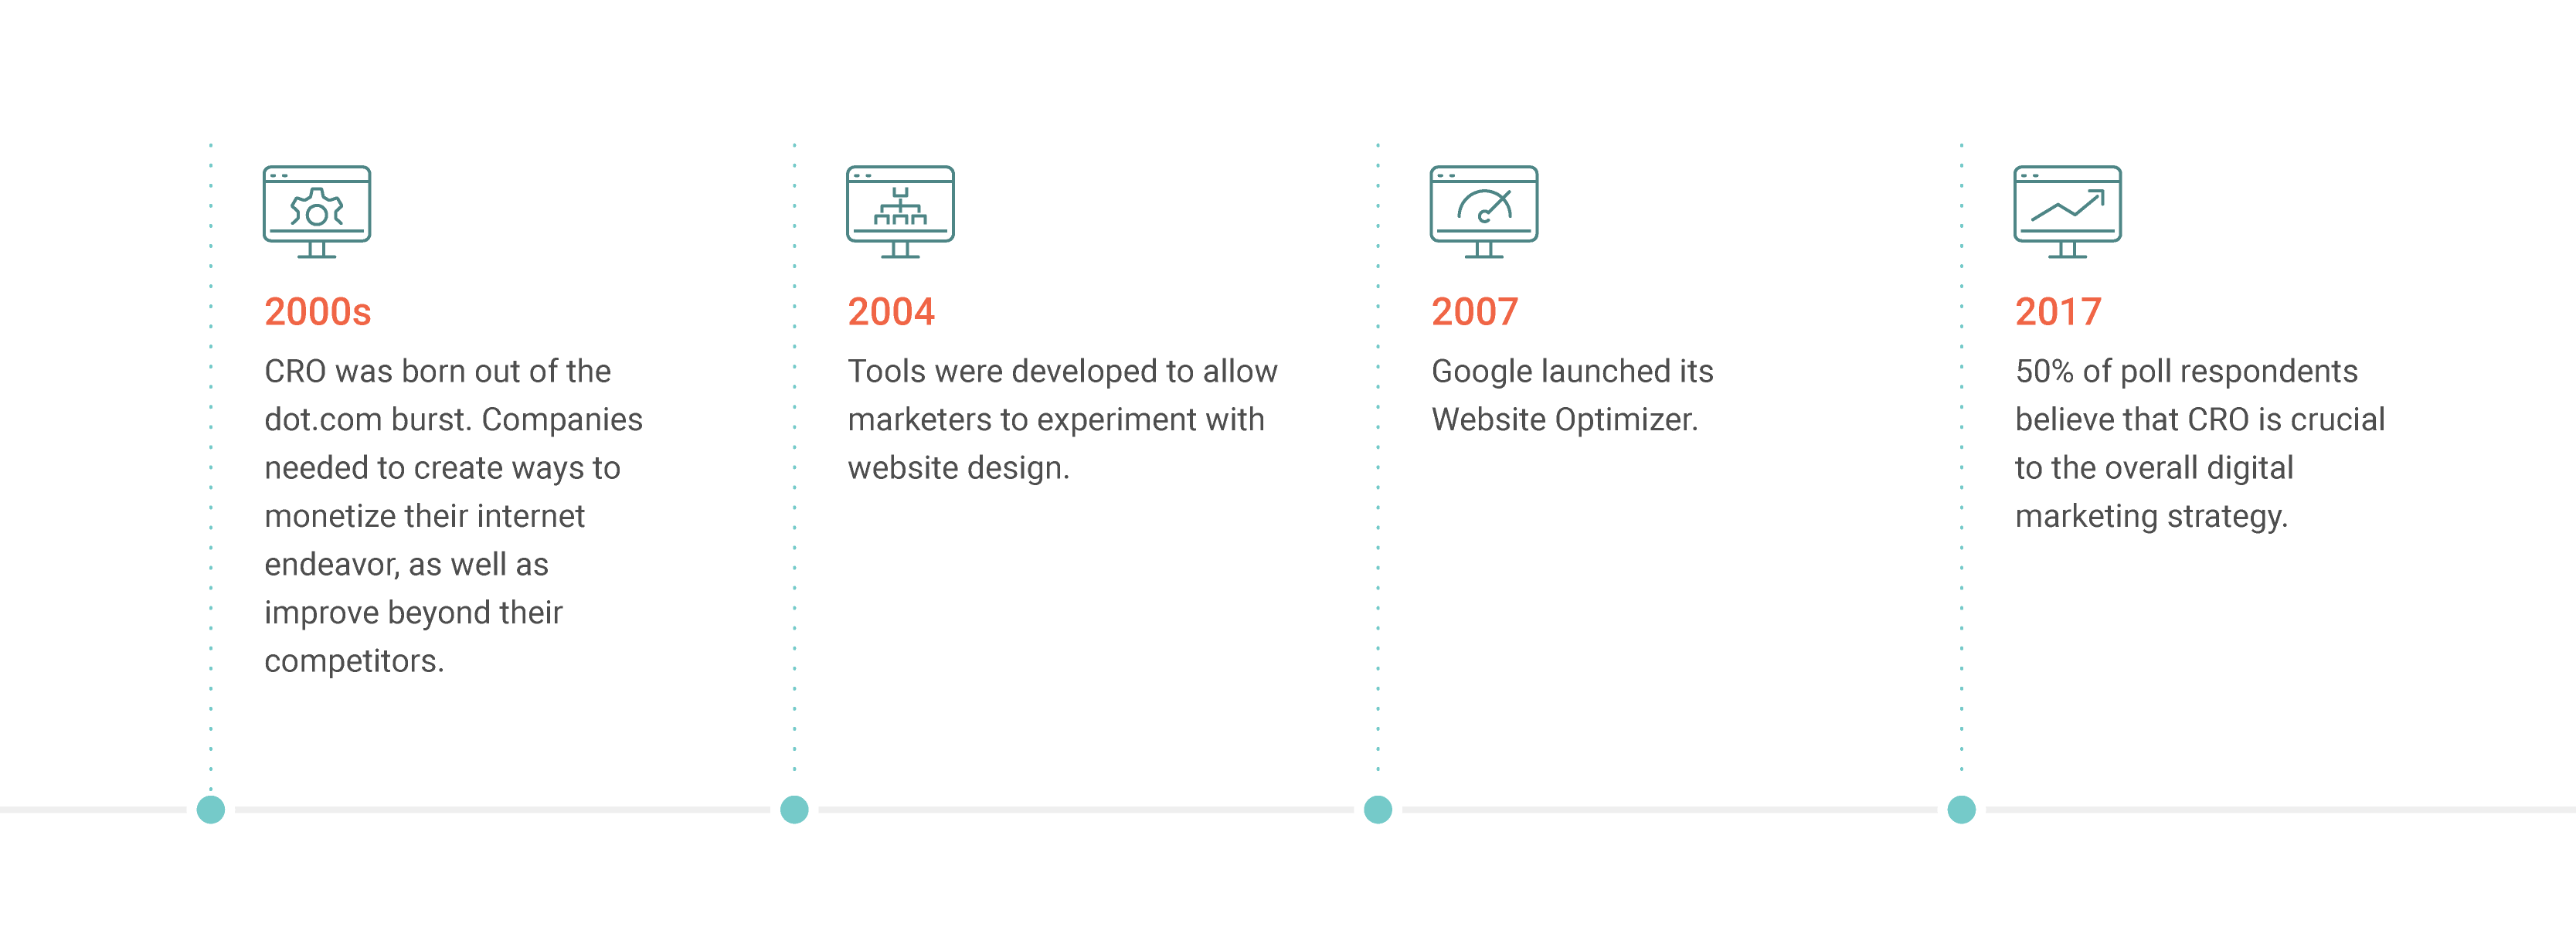 2000s: CRO was born out of the dot.com burst. Companies needed to create ways to monetize their internet endeavor, as well as improve beyond their competitors. 2004: Tools were developed to allow marketers to experiment with website design. 2007: Google launched its Website Optimizer. 2017: 50% of poll respondents believe that CRO is crucial to the overall digital marketing strategy.